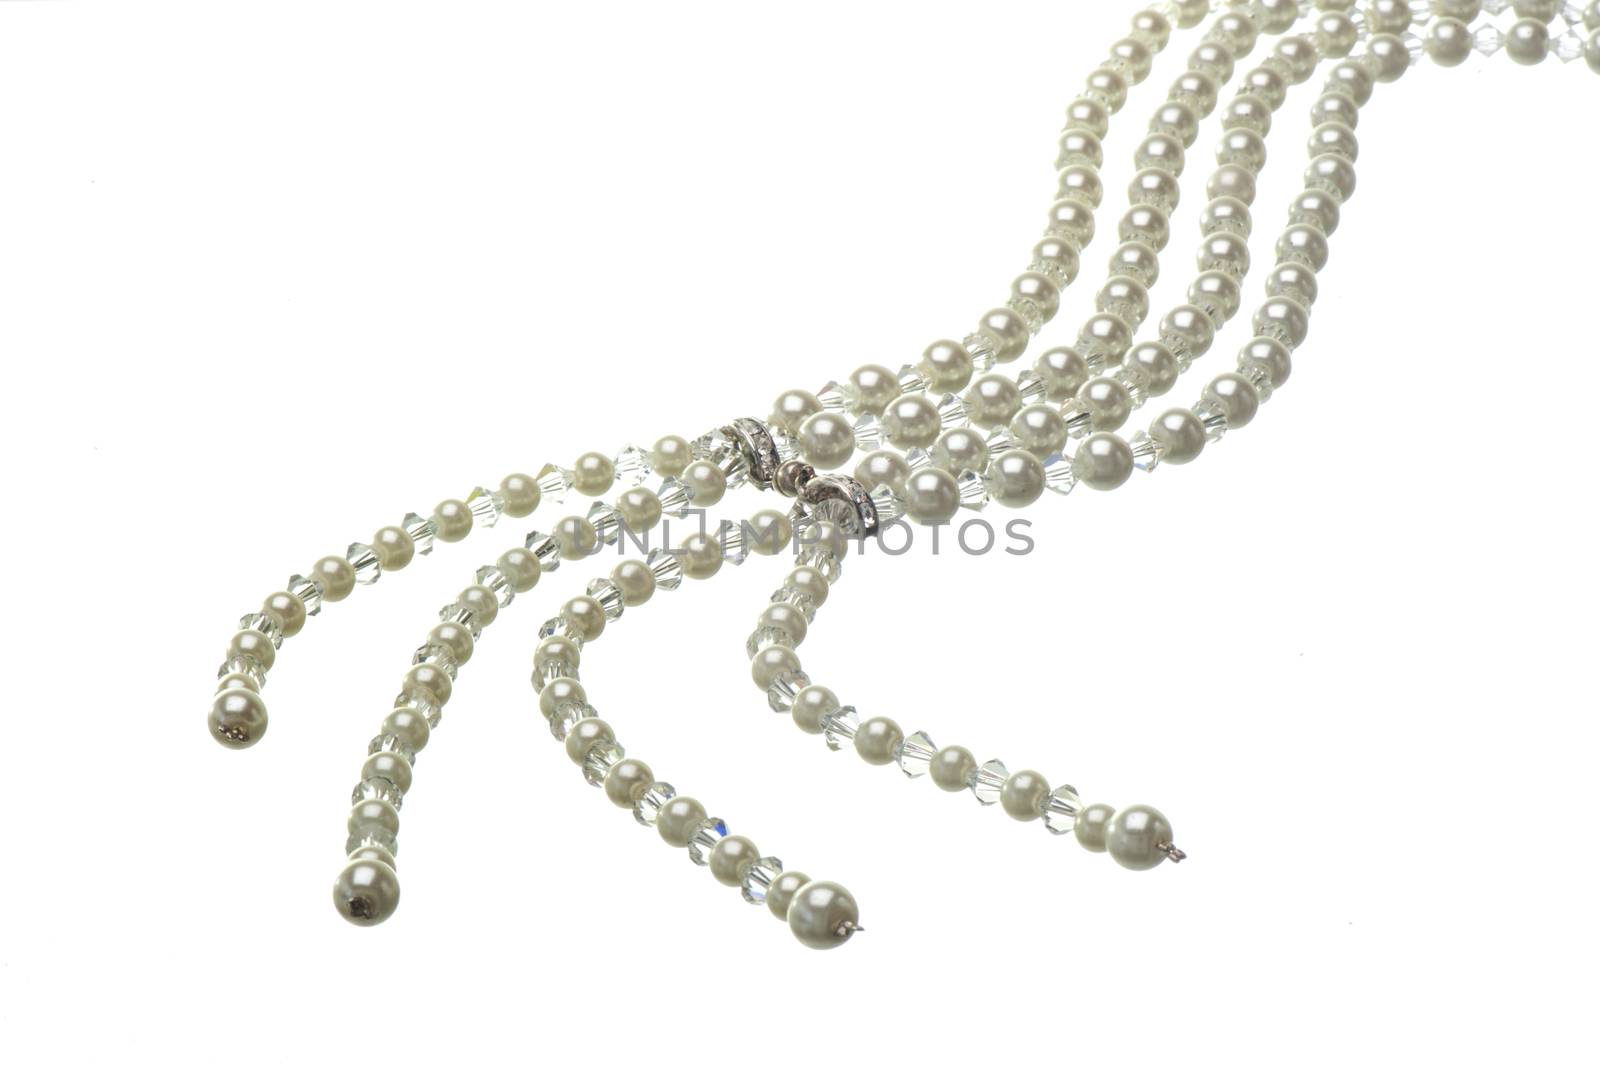 4-wire pearl necklace on a white background